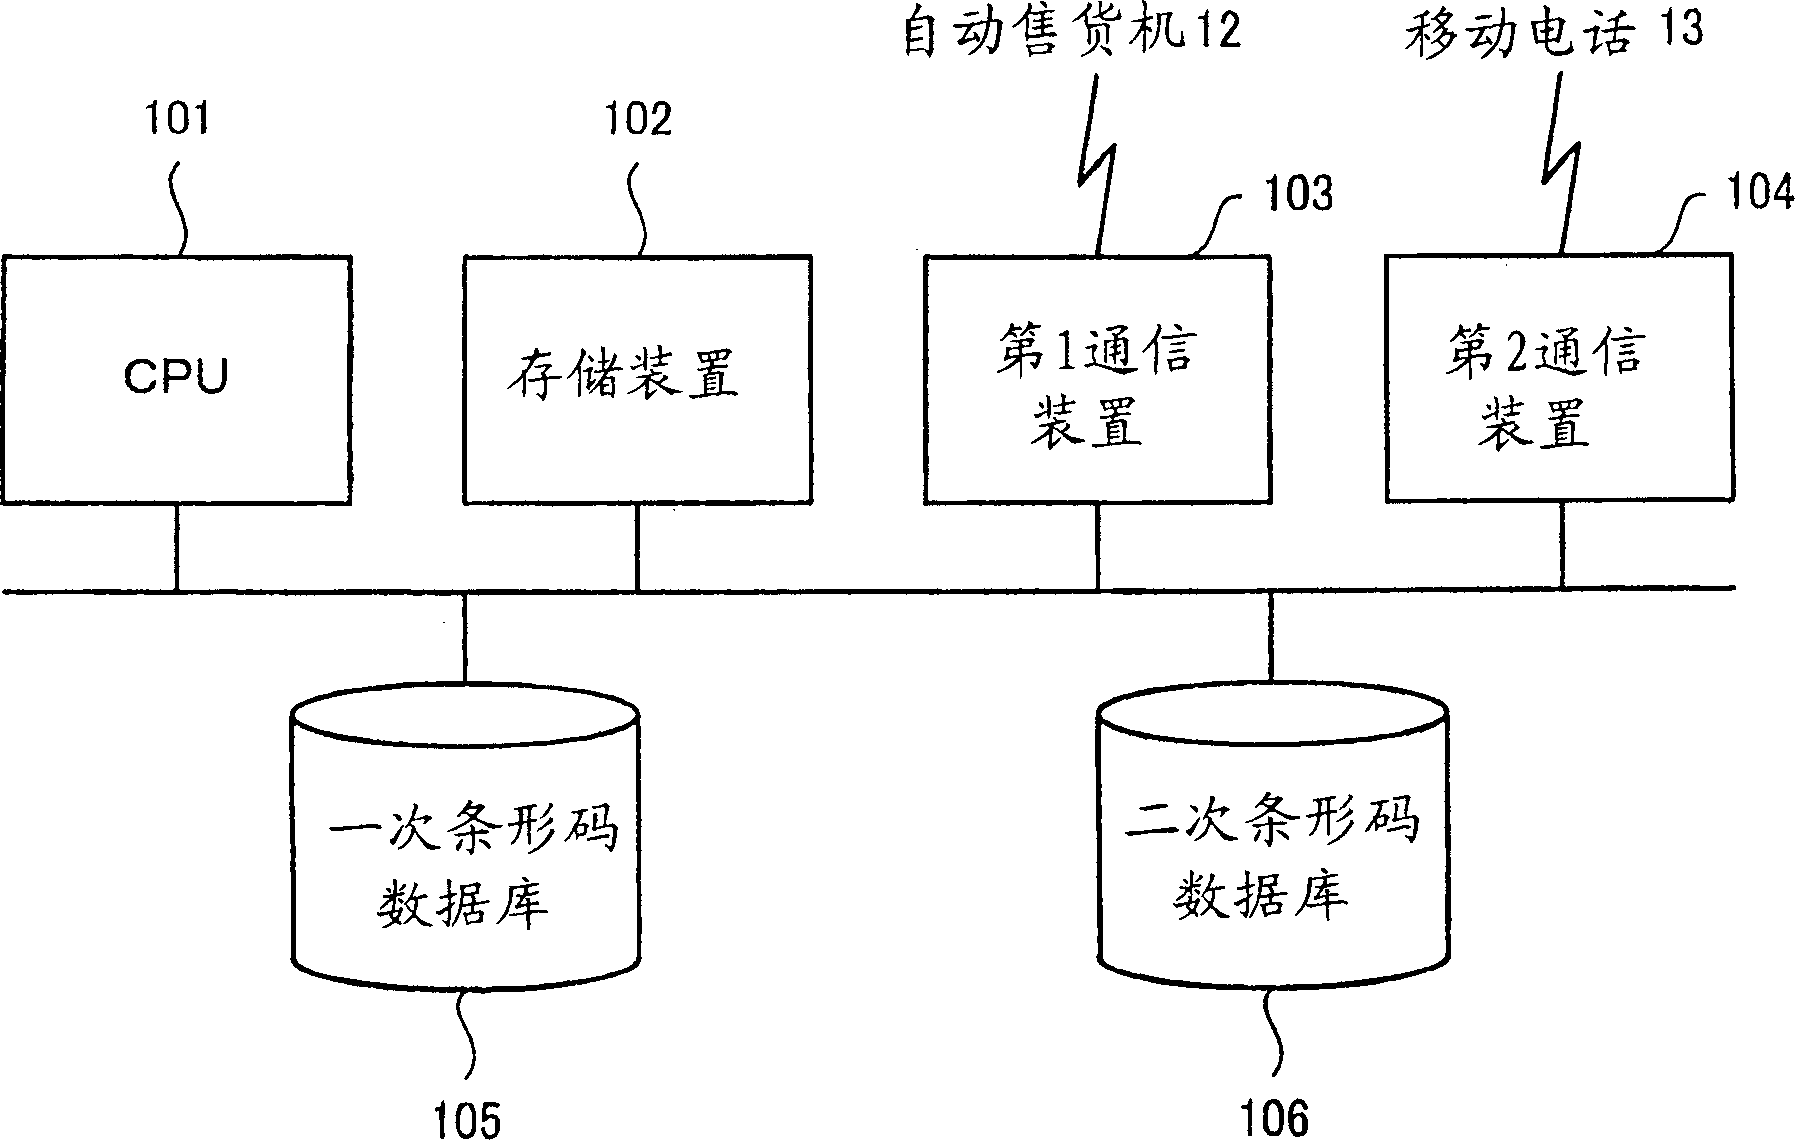 Identification information issuing system